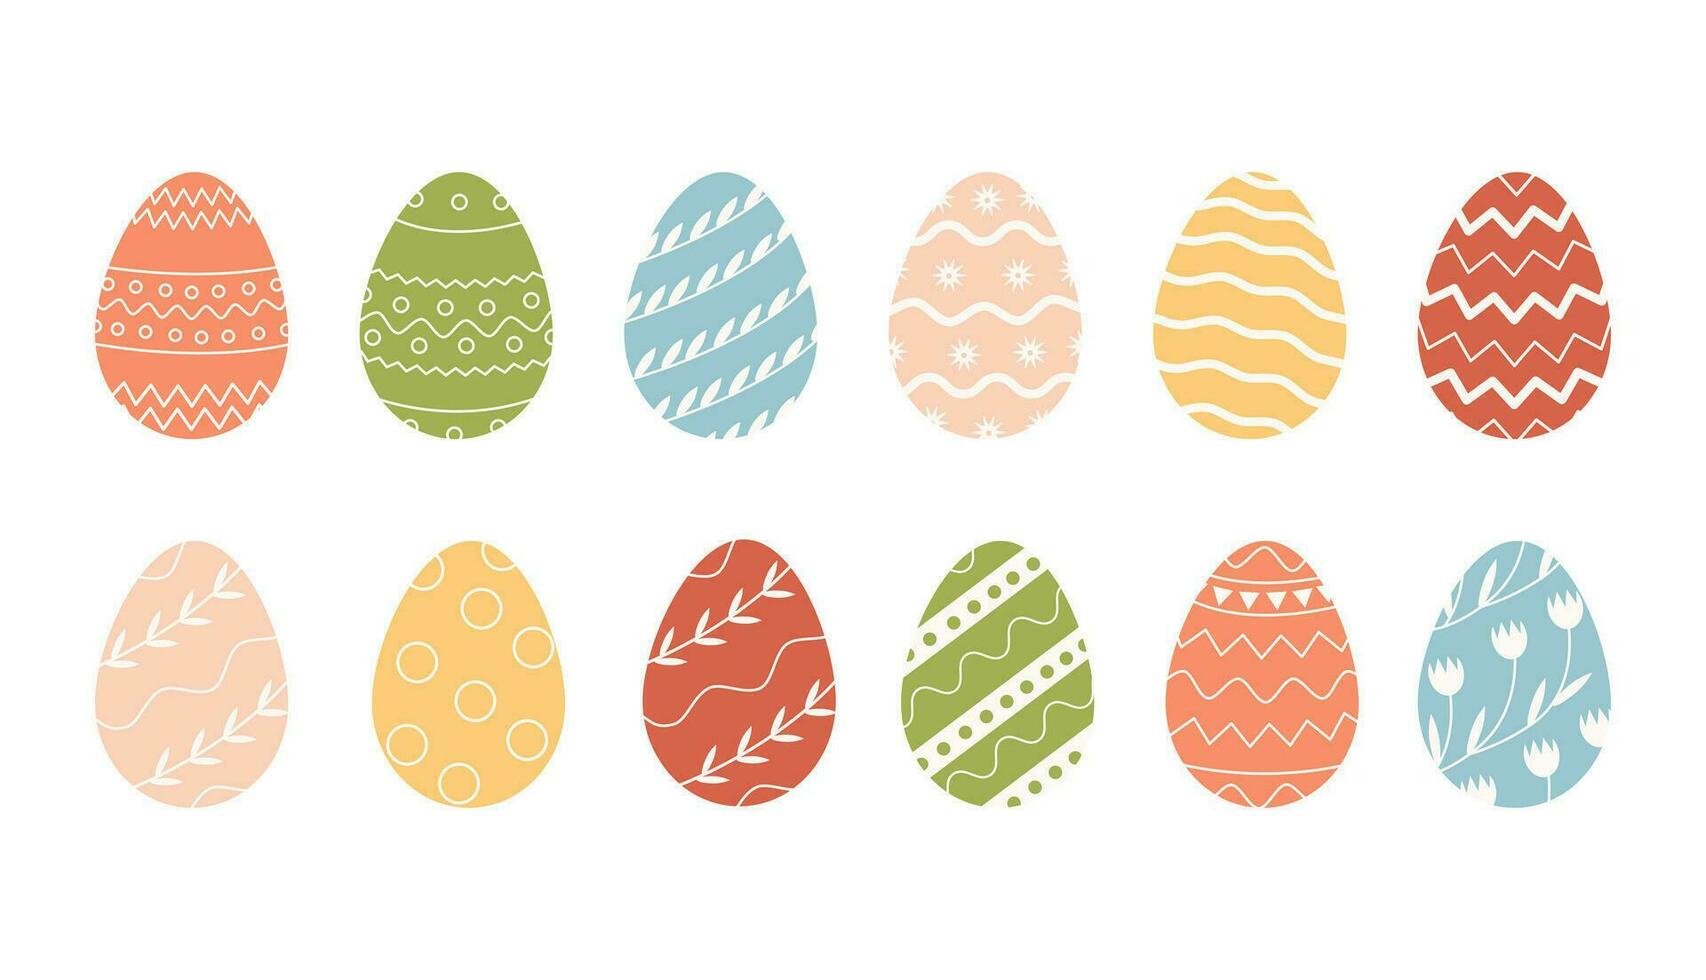 Bundle of decorated Easter eggs isolated on white background. Collection of colored symbols for religious spring holiday with various ornaments. Seasonal set for Paschal. Flat illustration. vector